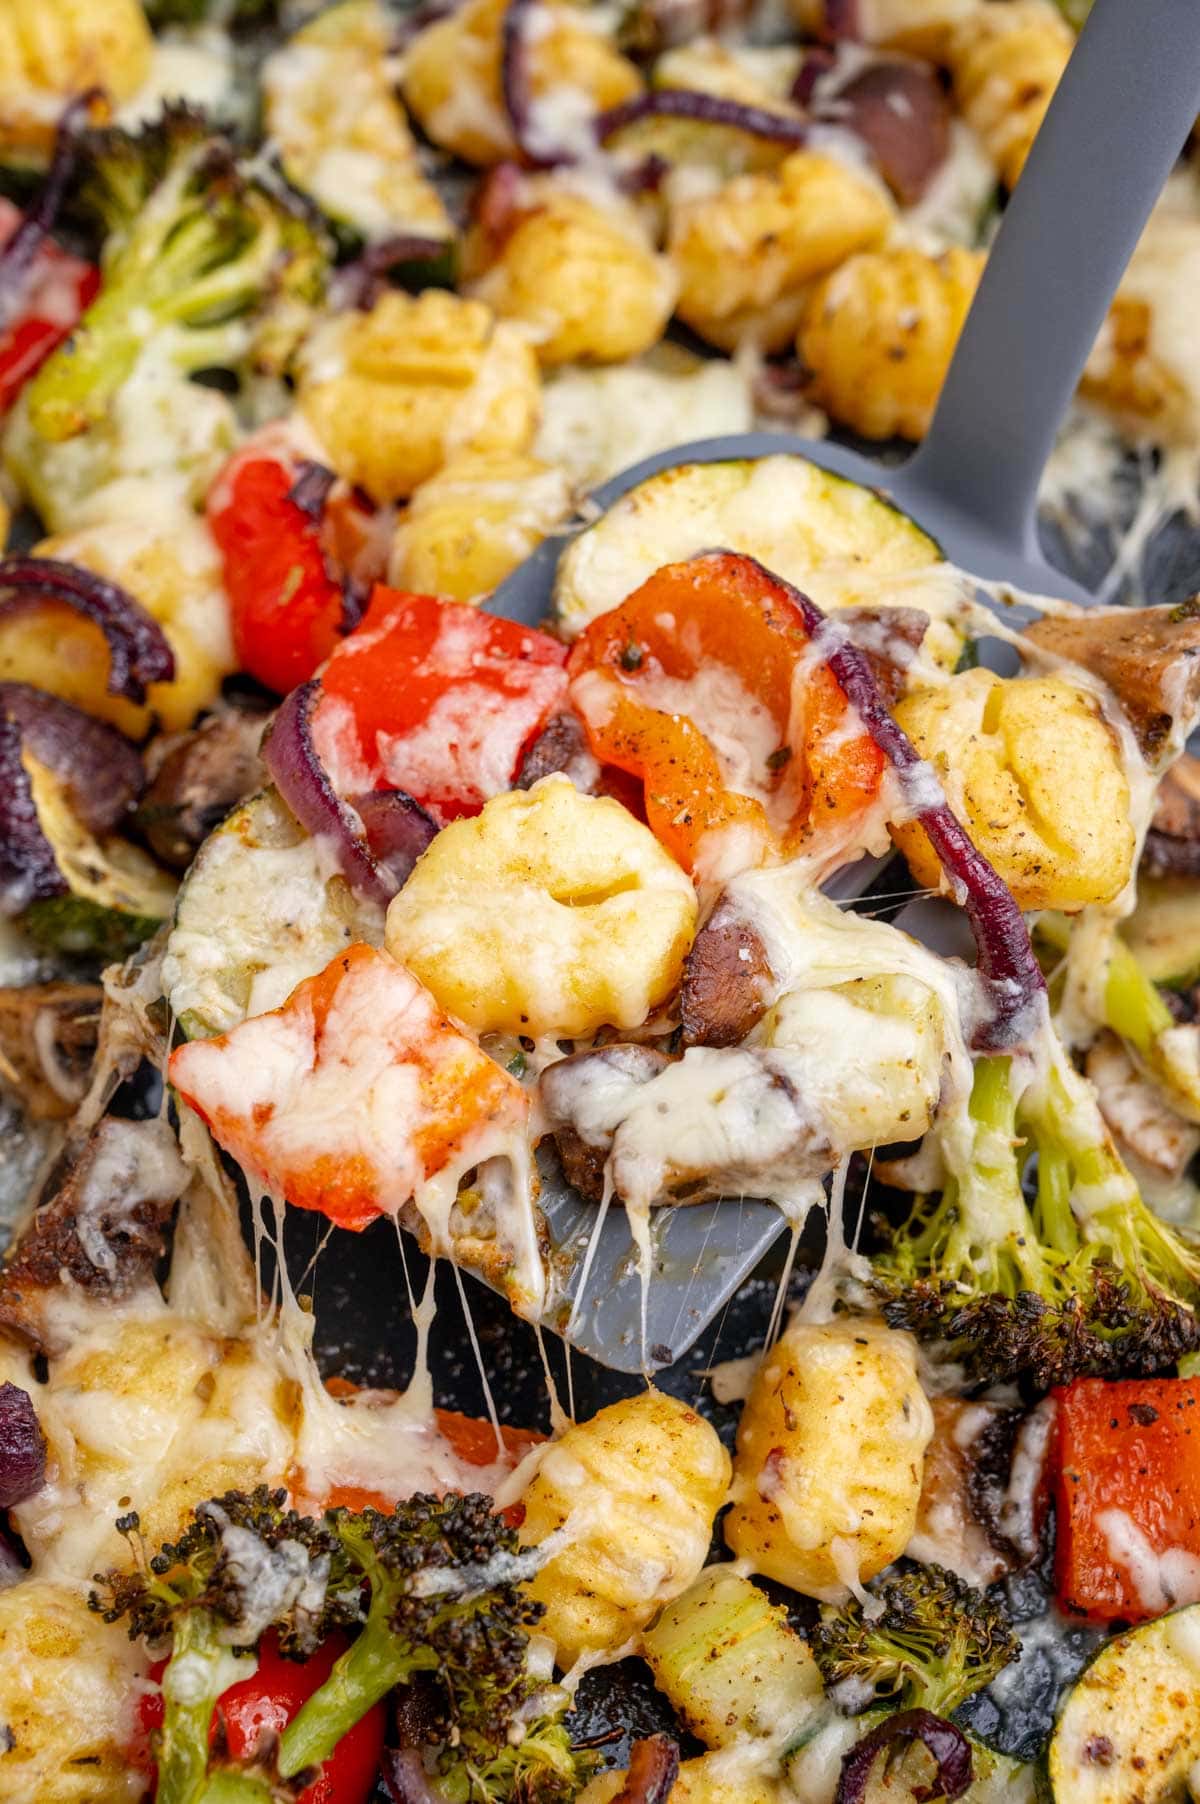 A close up photo of gnocchi with vegetables and cheese on a spatula.